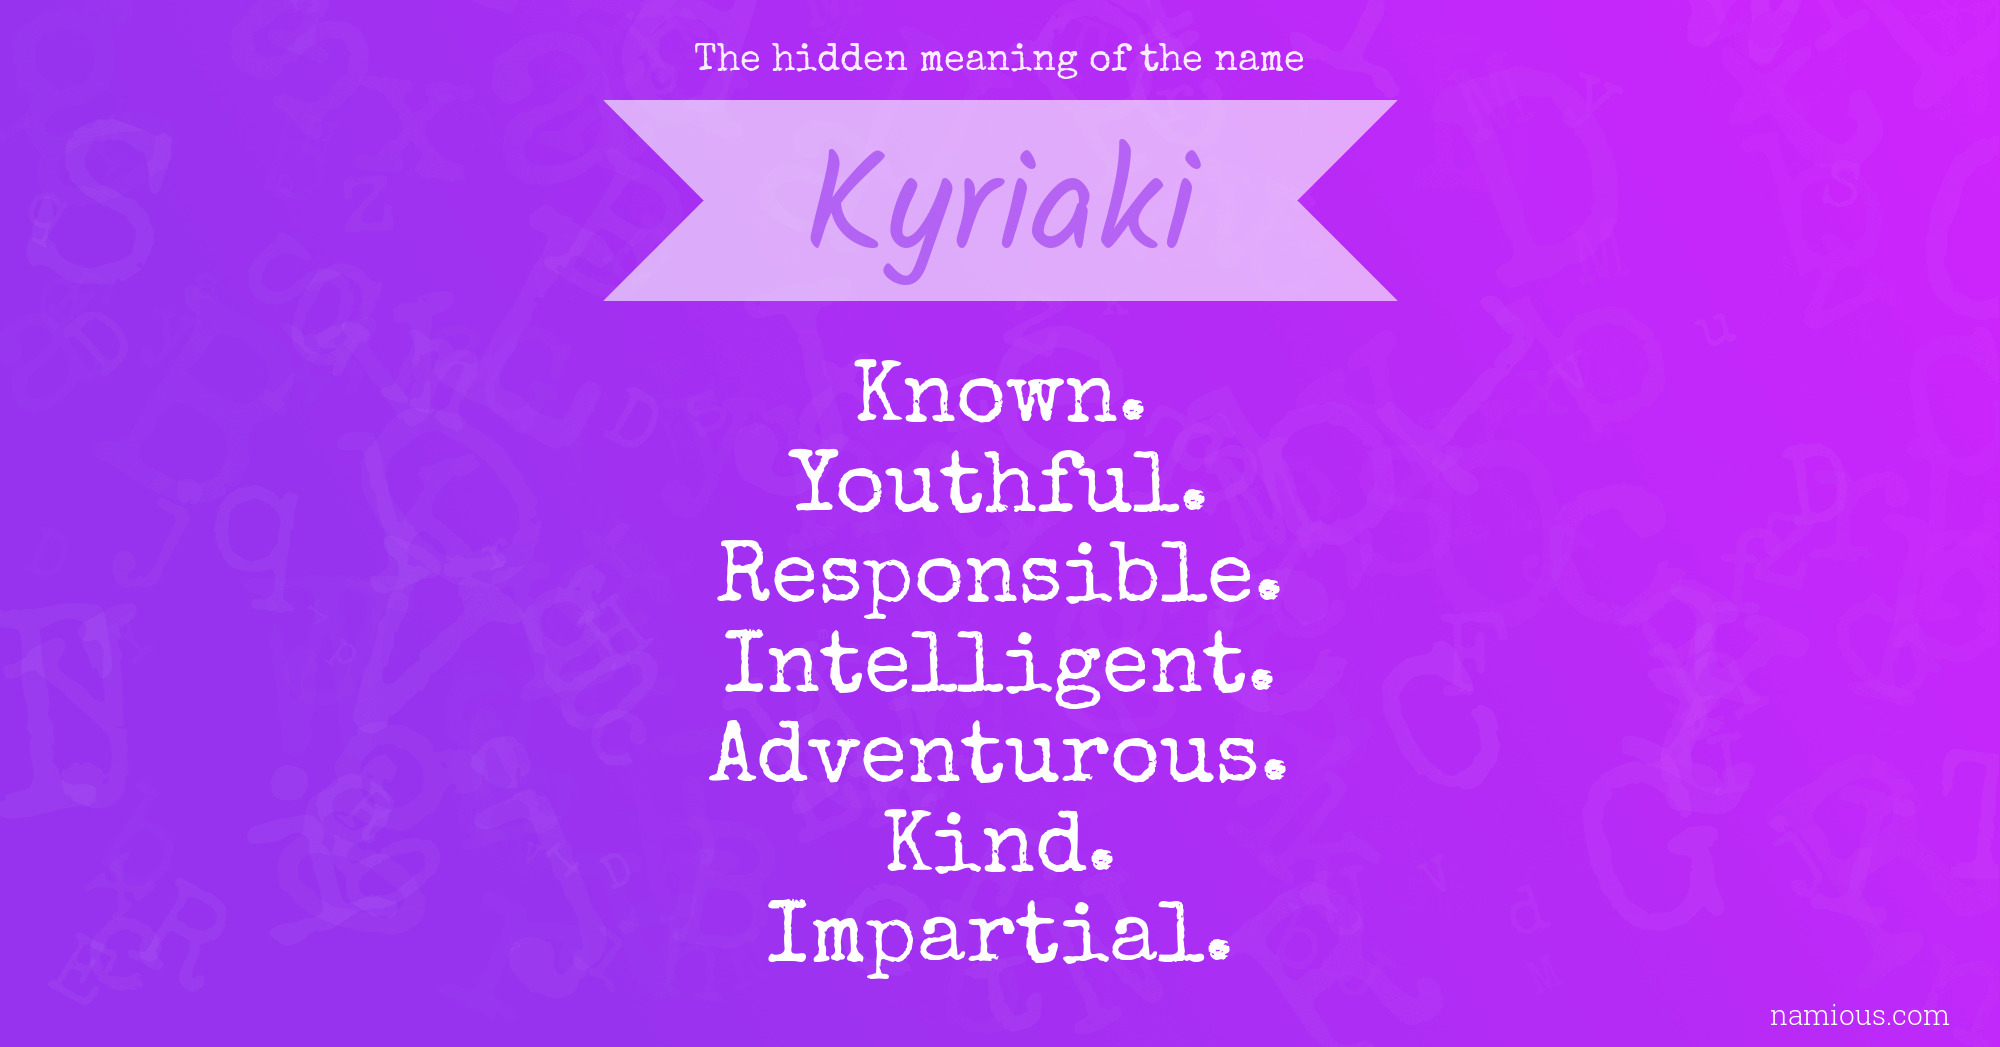 The hidden meaning of the name Kyriaki